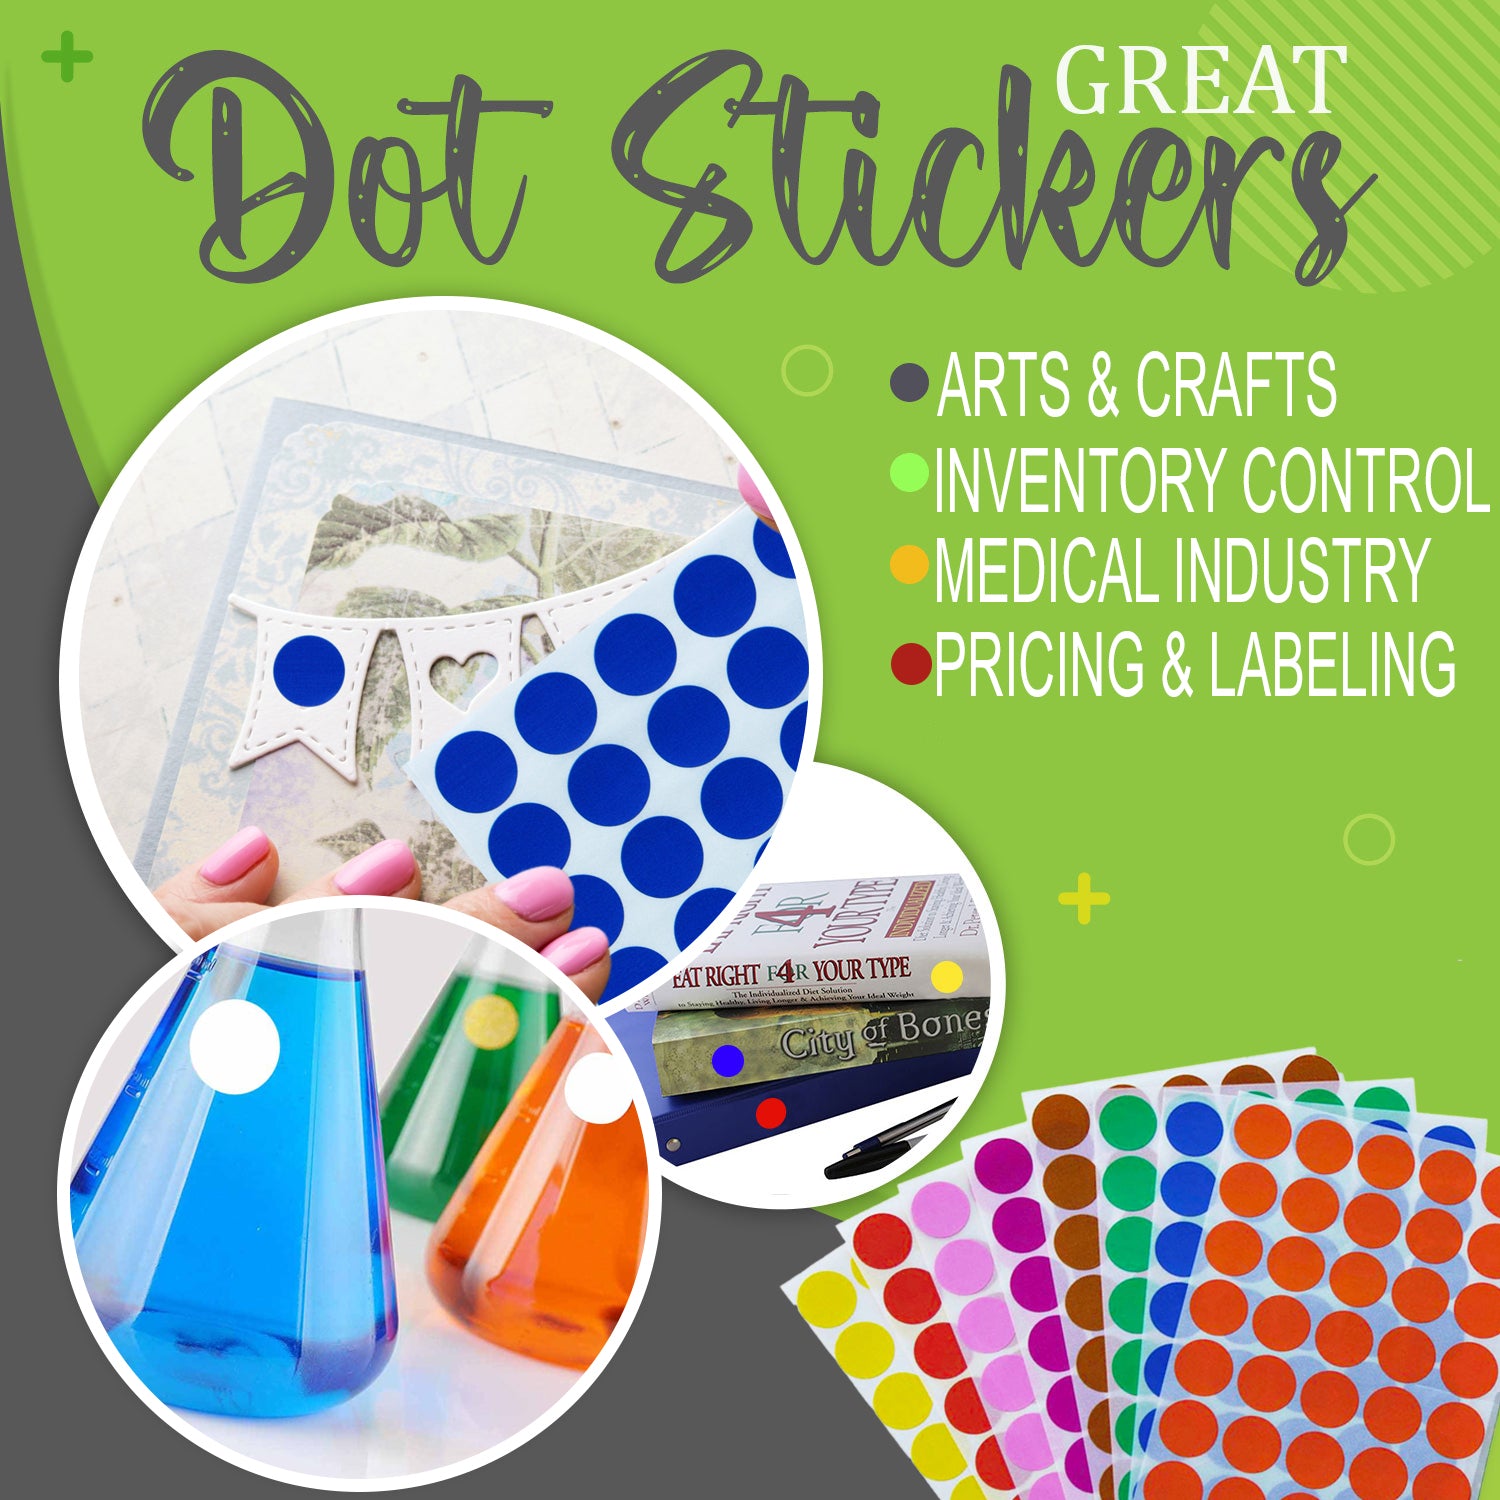 Color Dot stickers ~ 3/4 17 mm Colored round labels in Green